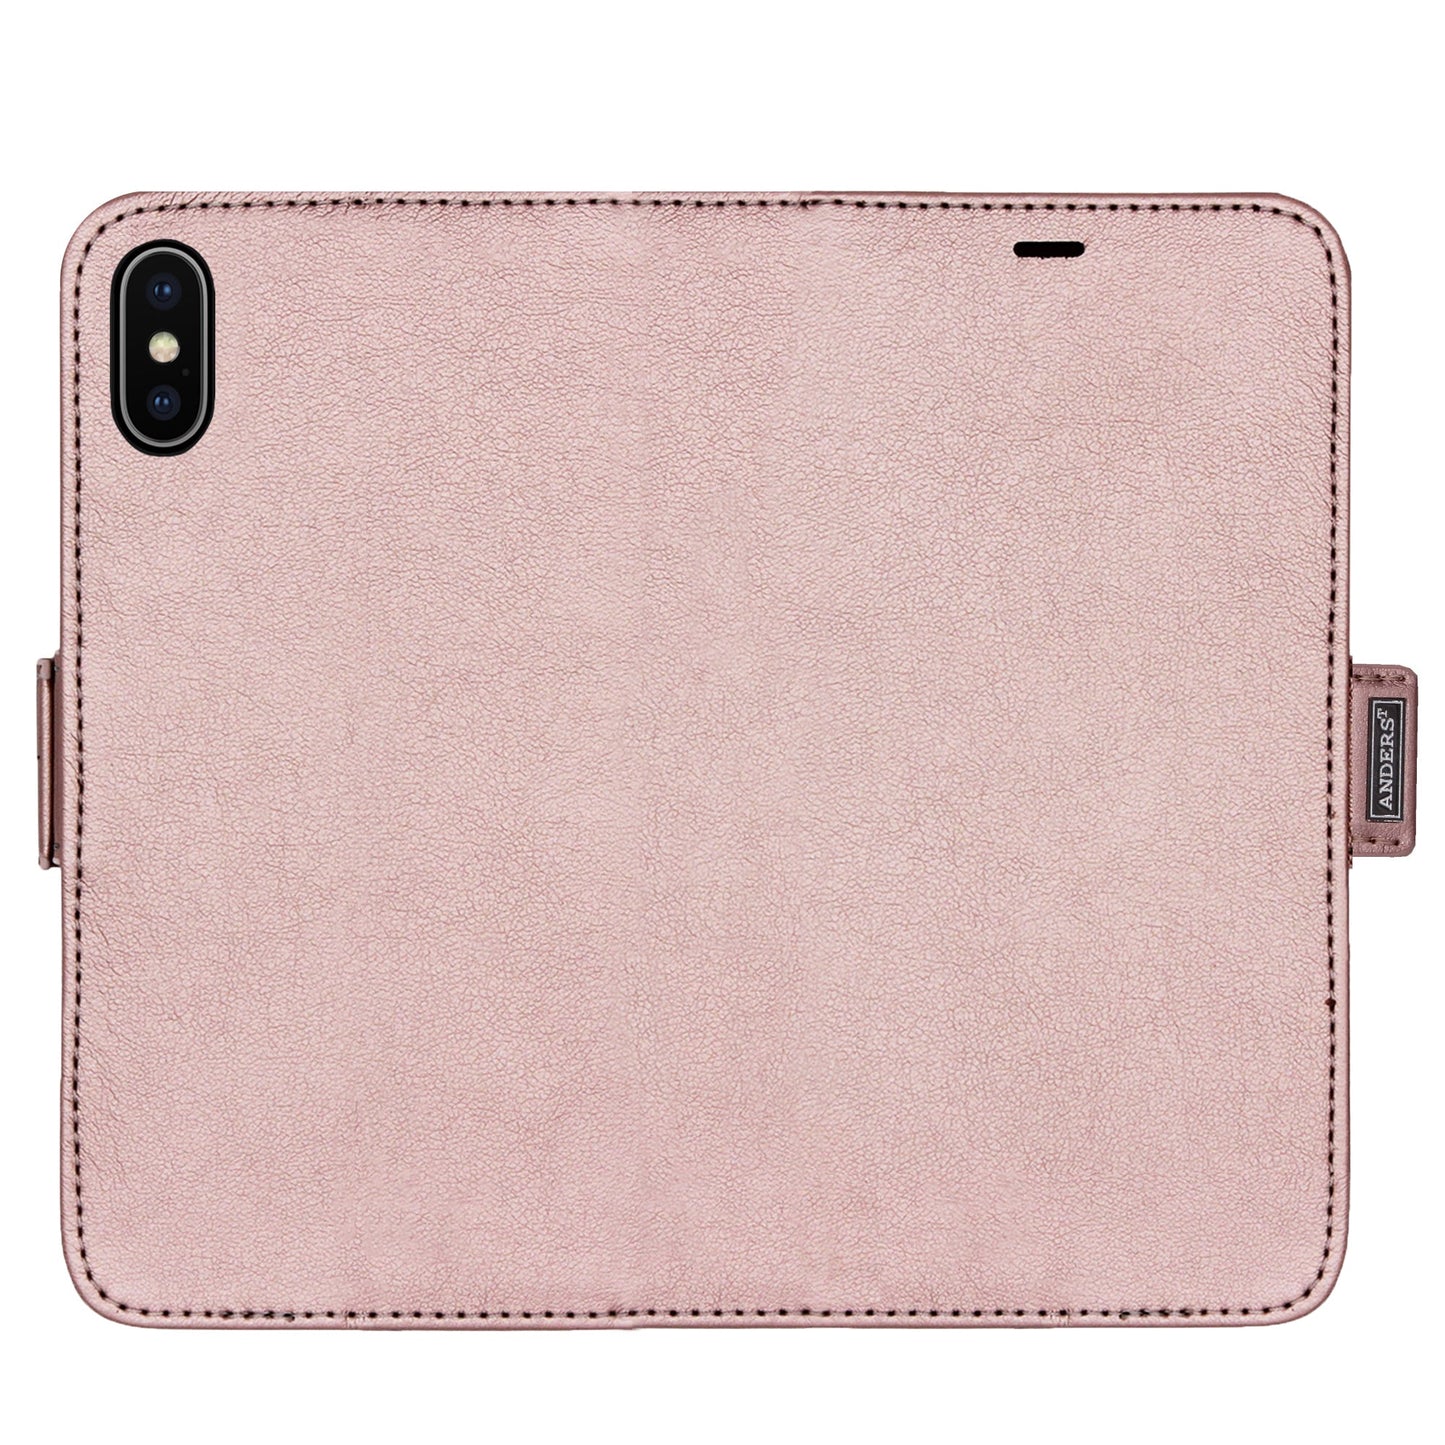 Solid Rose Gold Victor Case for iPhone X/XS